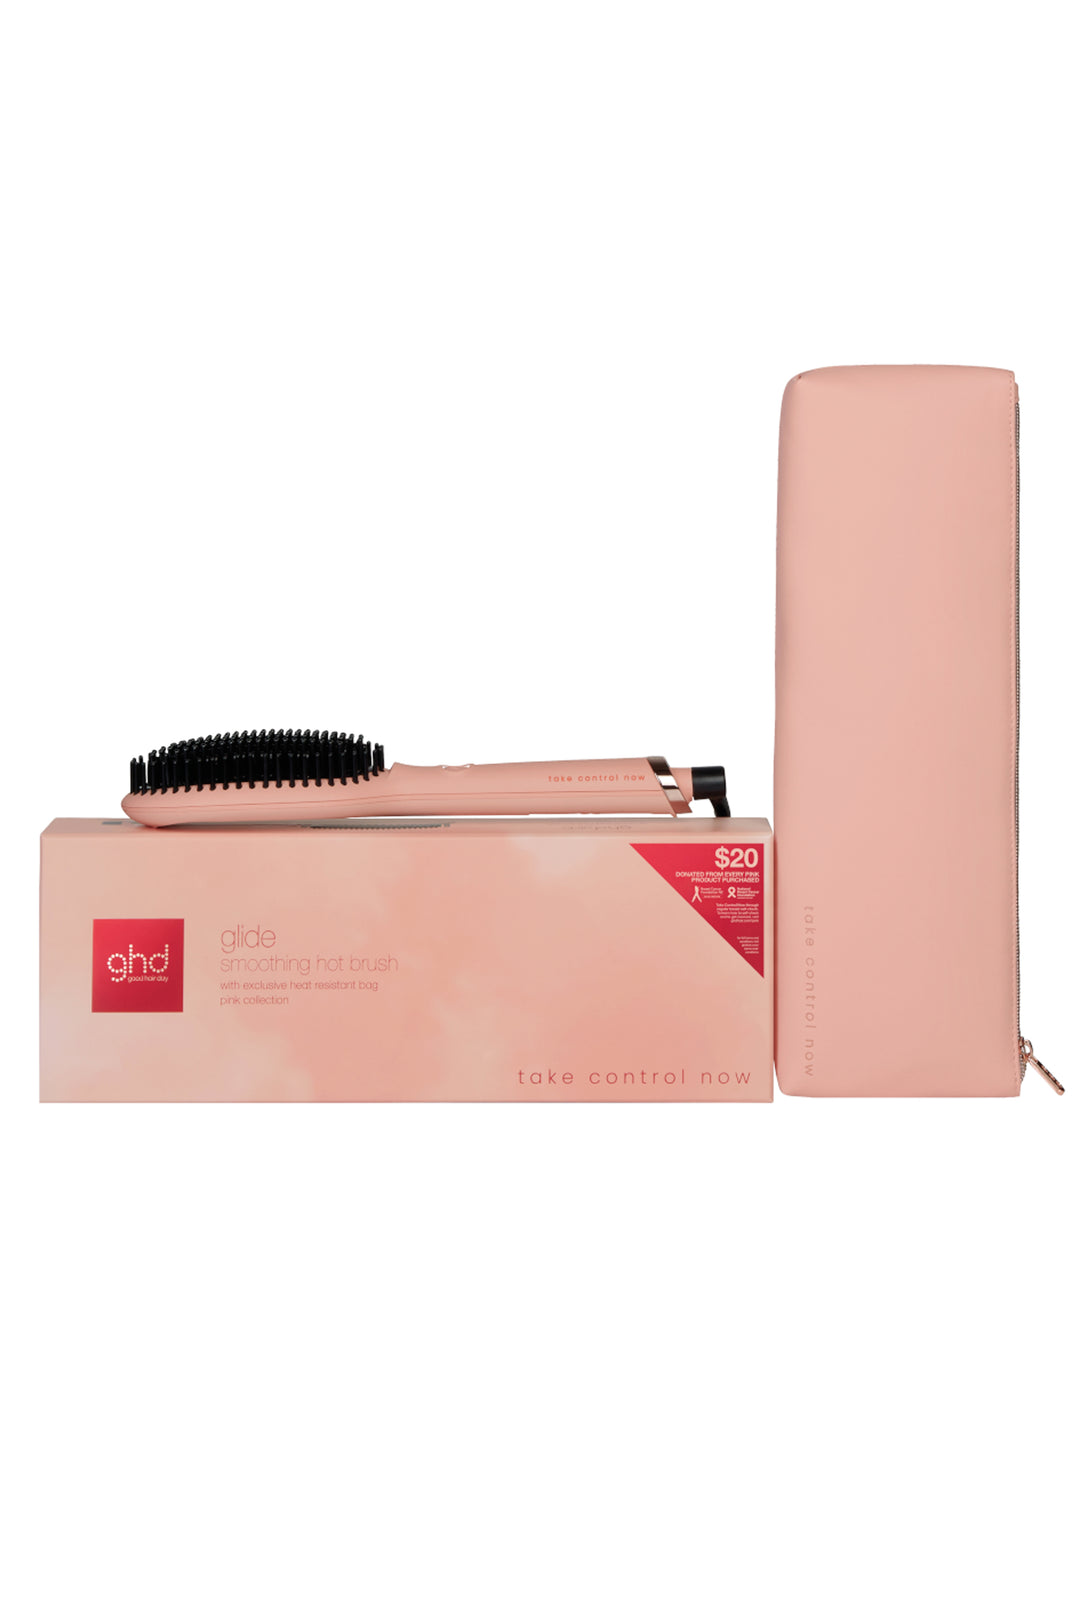 GHD GLIDE TAKE CONTROL NOW PINK COLLECTION